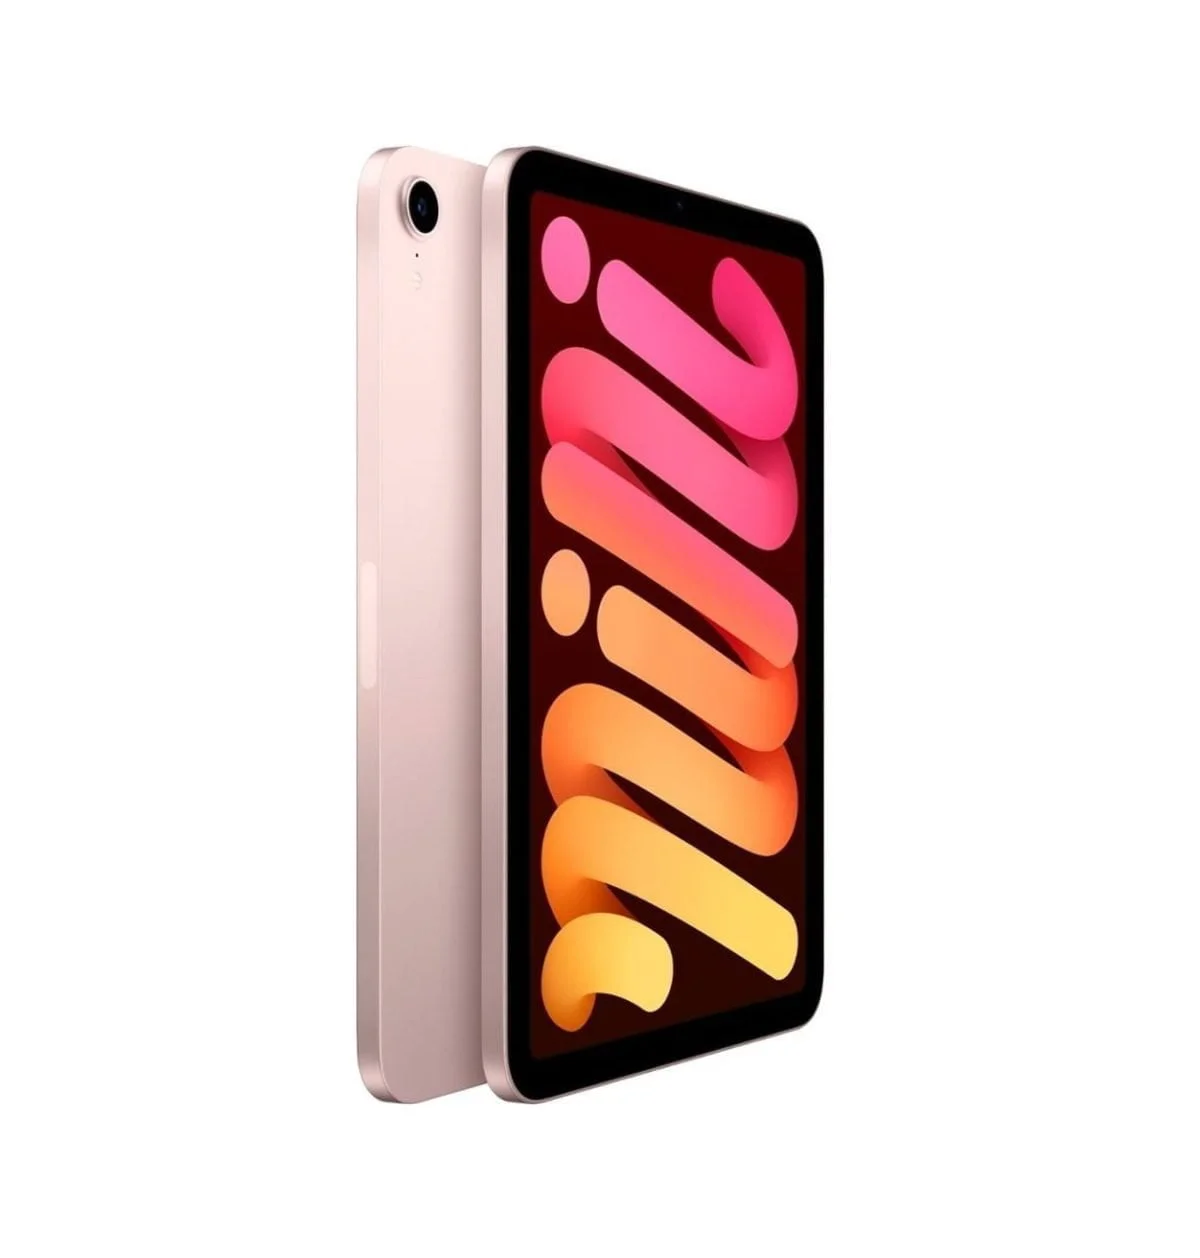 Apple &Lt;H1&Gt;Apple - Ipad Mini 6Th Generation (Latest Model) With Wi-Fi - 64Gb - Pink&Lt;/H1&Gt; &Lt;Div Class=&Quot;Long-Description-Container Body-Copy &Quot;&Gt; &Lt;Div Class=&Quot;Html-Fragment&Quot;&Gt; &Lt;Div&Gt; &Lt;Div&Gt;The New Ipad Mini. Featuring An All-Screen Design With An 8.3-Inch Liquid Retina Display.¹ Powerful A15 Bionic Chip With Neural Engine. A 12Mp Ultra Wide Front Camera With Center Stage. Usb-C Connectivity. Take Notes, Mark Up Documents, Or Capture Your Biggest Ideas With Apple Pencil (2Nd Generation) That Attaches Magnetically And Charges Wirelessly.&Lt;/Div&Gt; &Lt;/Div&Gt; &Lt;/Div&Gt; &Lt;/Div&Gt; Ipad Mini Apple - Ipad Mini 6Th Generation (Latest Model) With Wi-Fi - 64Gb - Pink